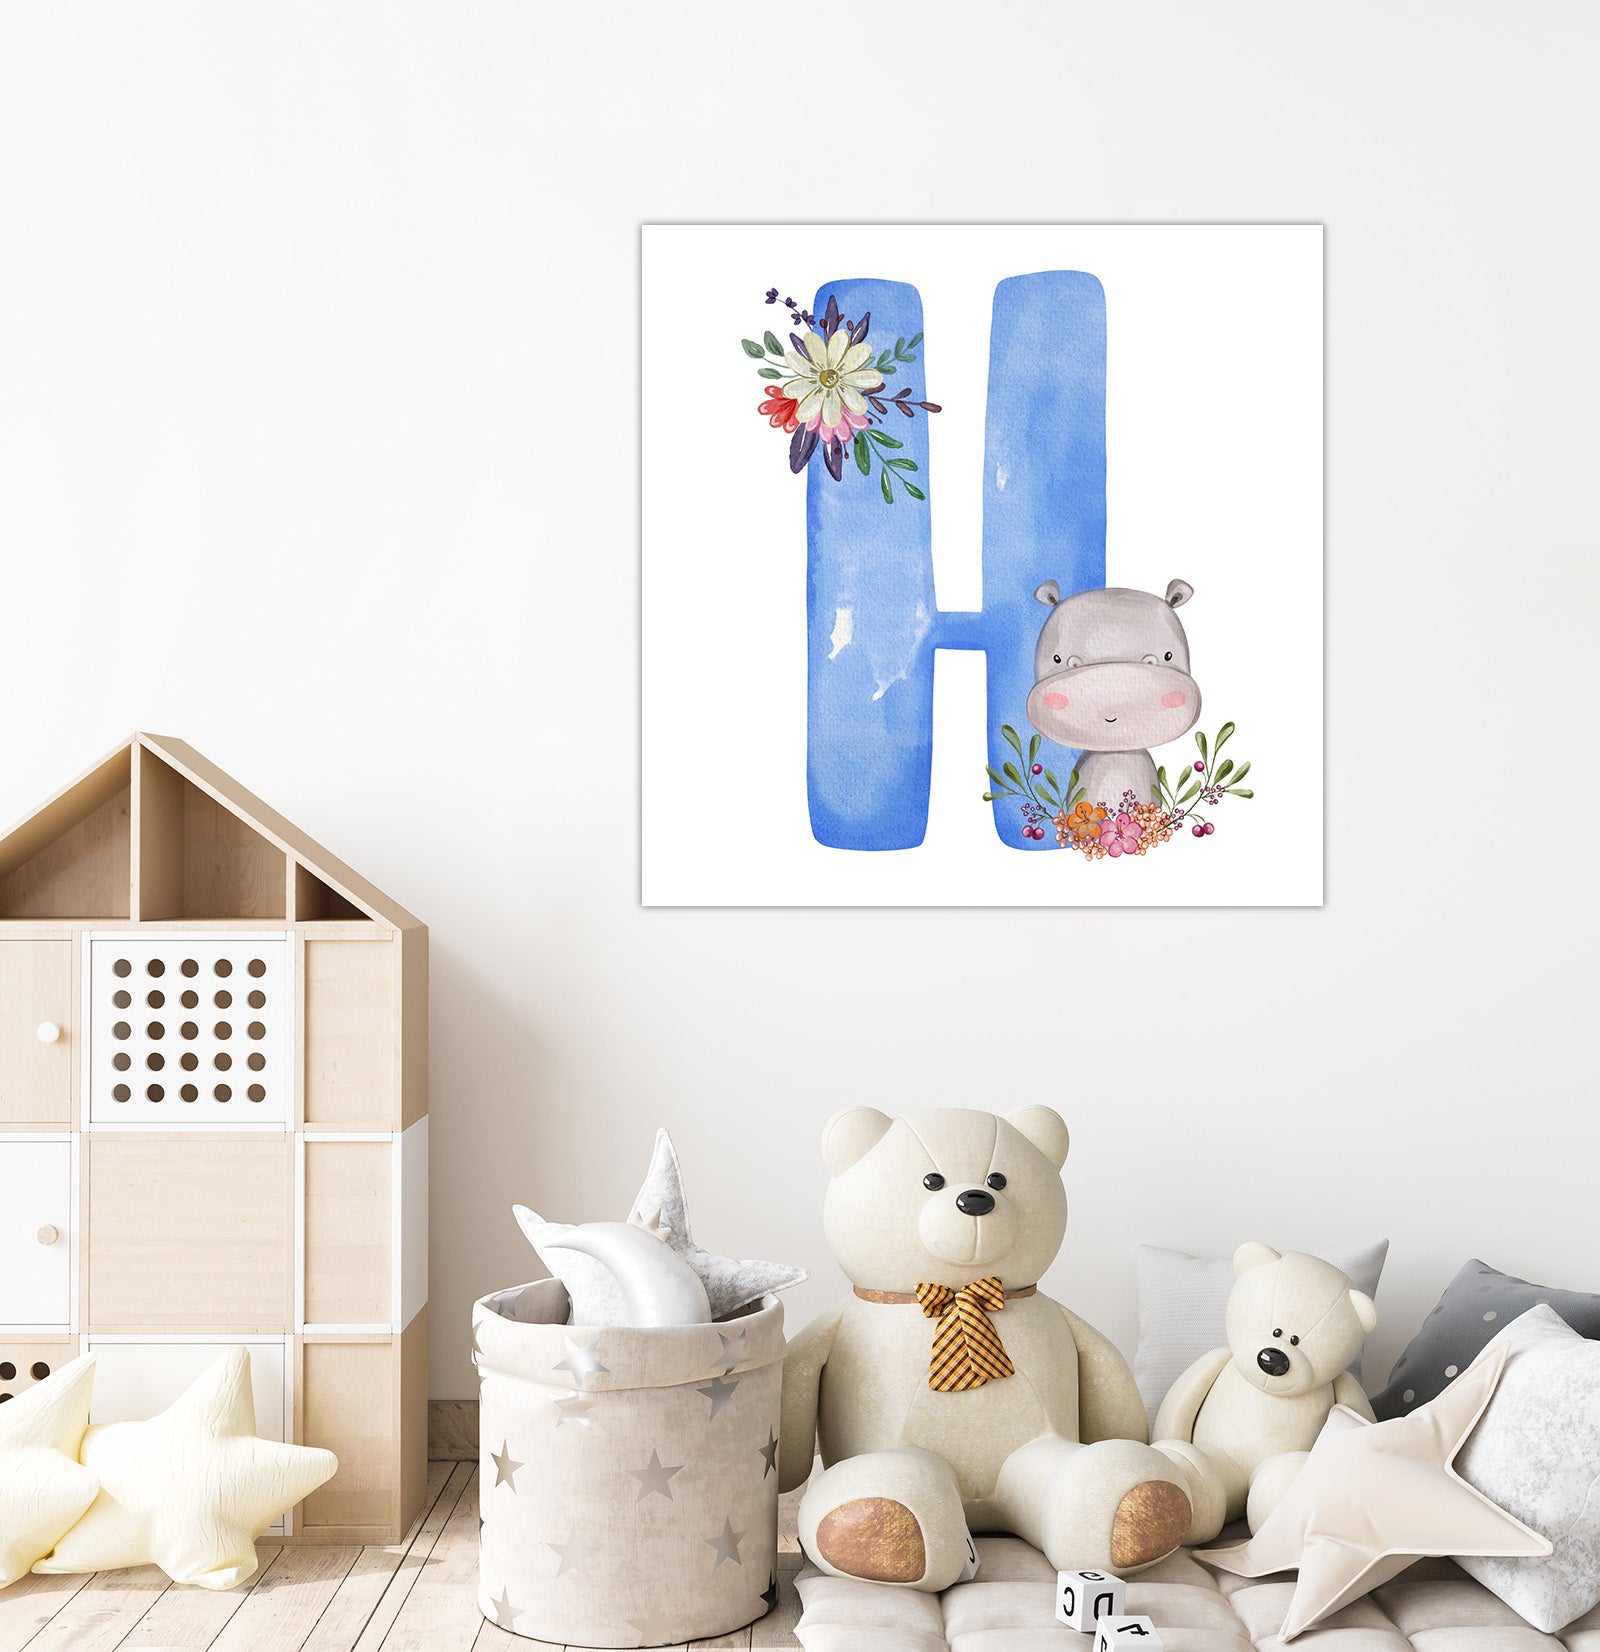 Wall Painting For Kids' Room (Letter H)